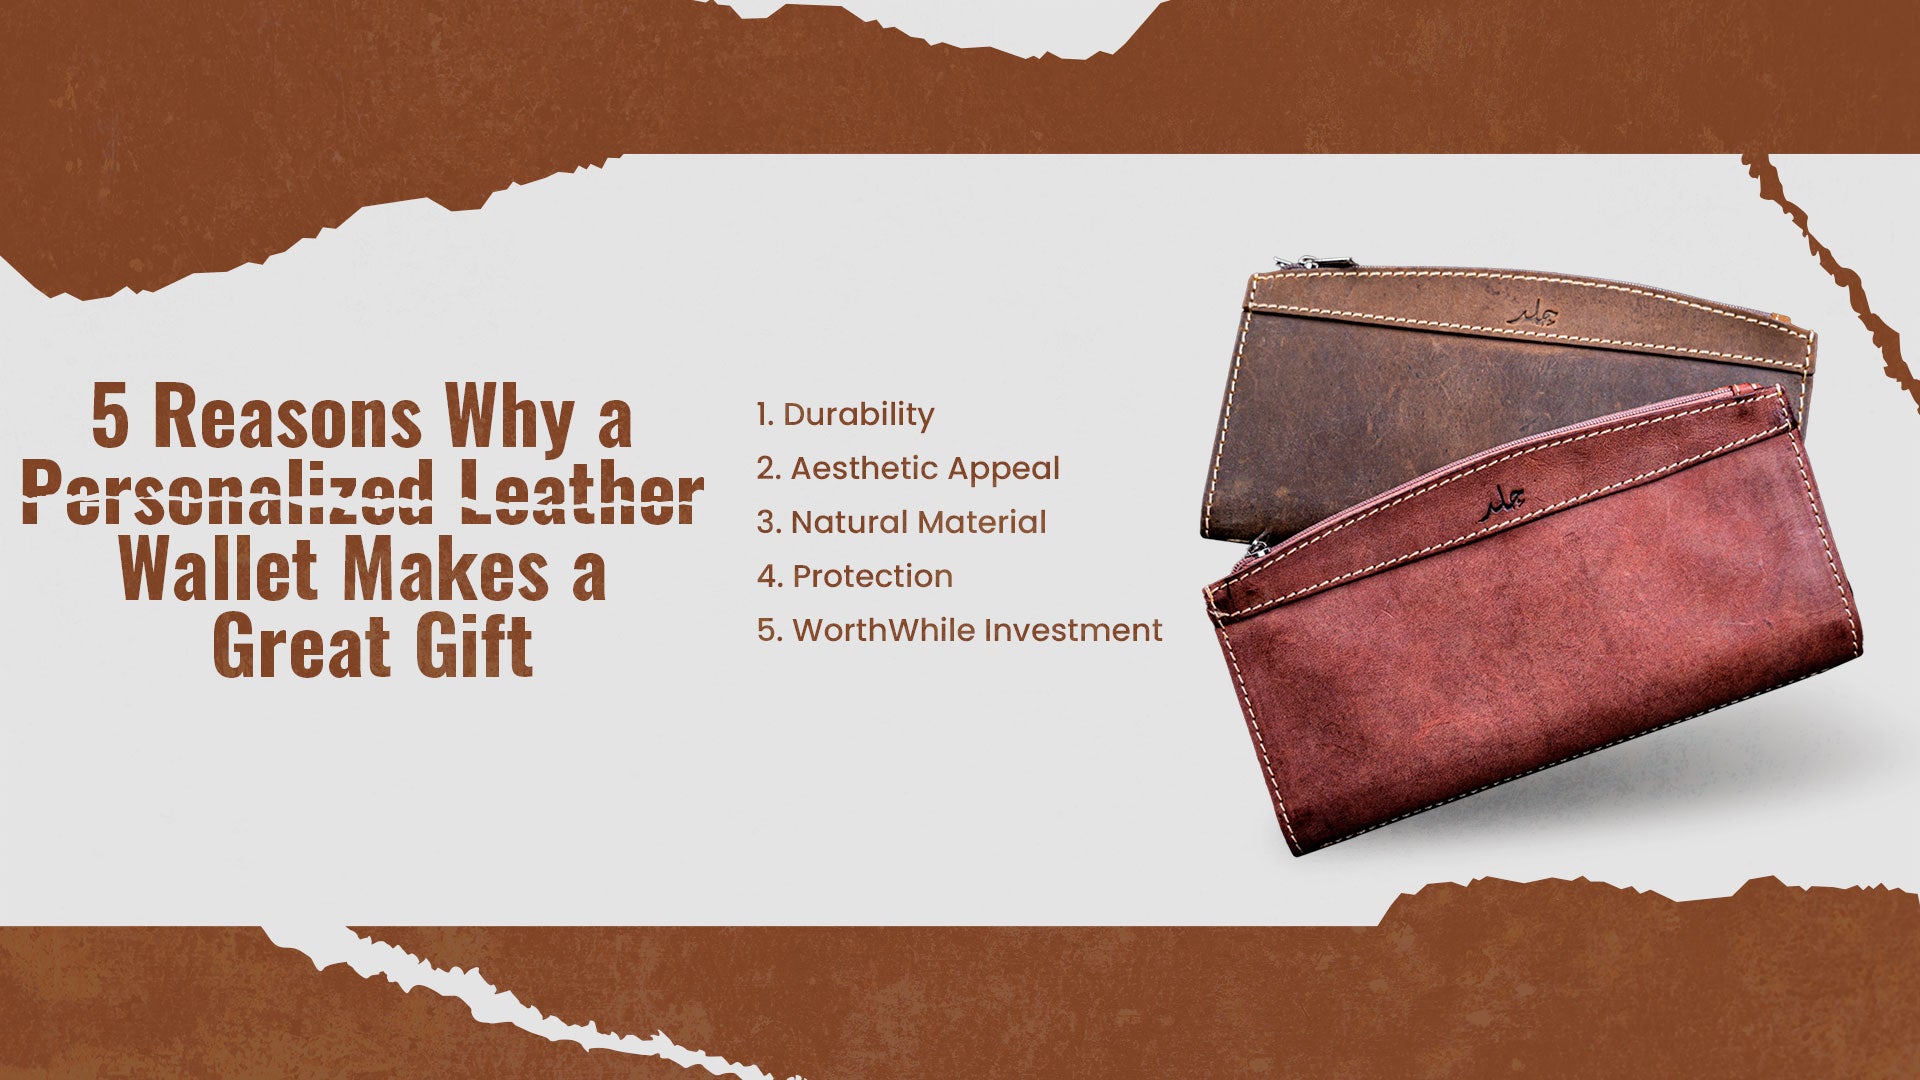 5 Reasons Why a Personalized Leather Wallet Makes a Great Gift